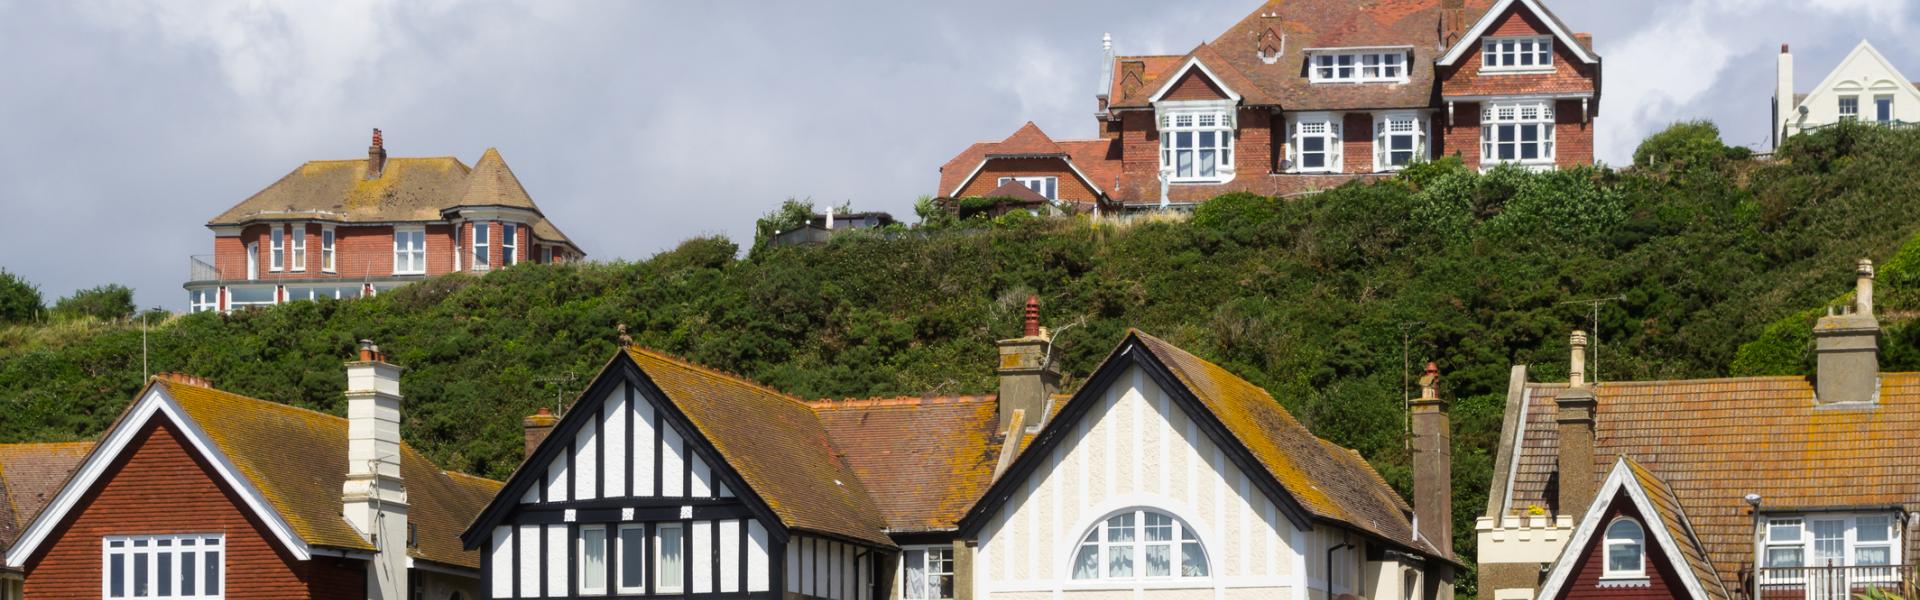 Accommodation in Hastings - HomeToGo